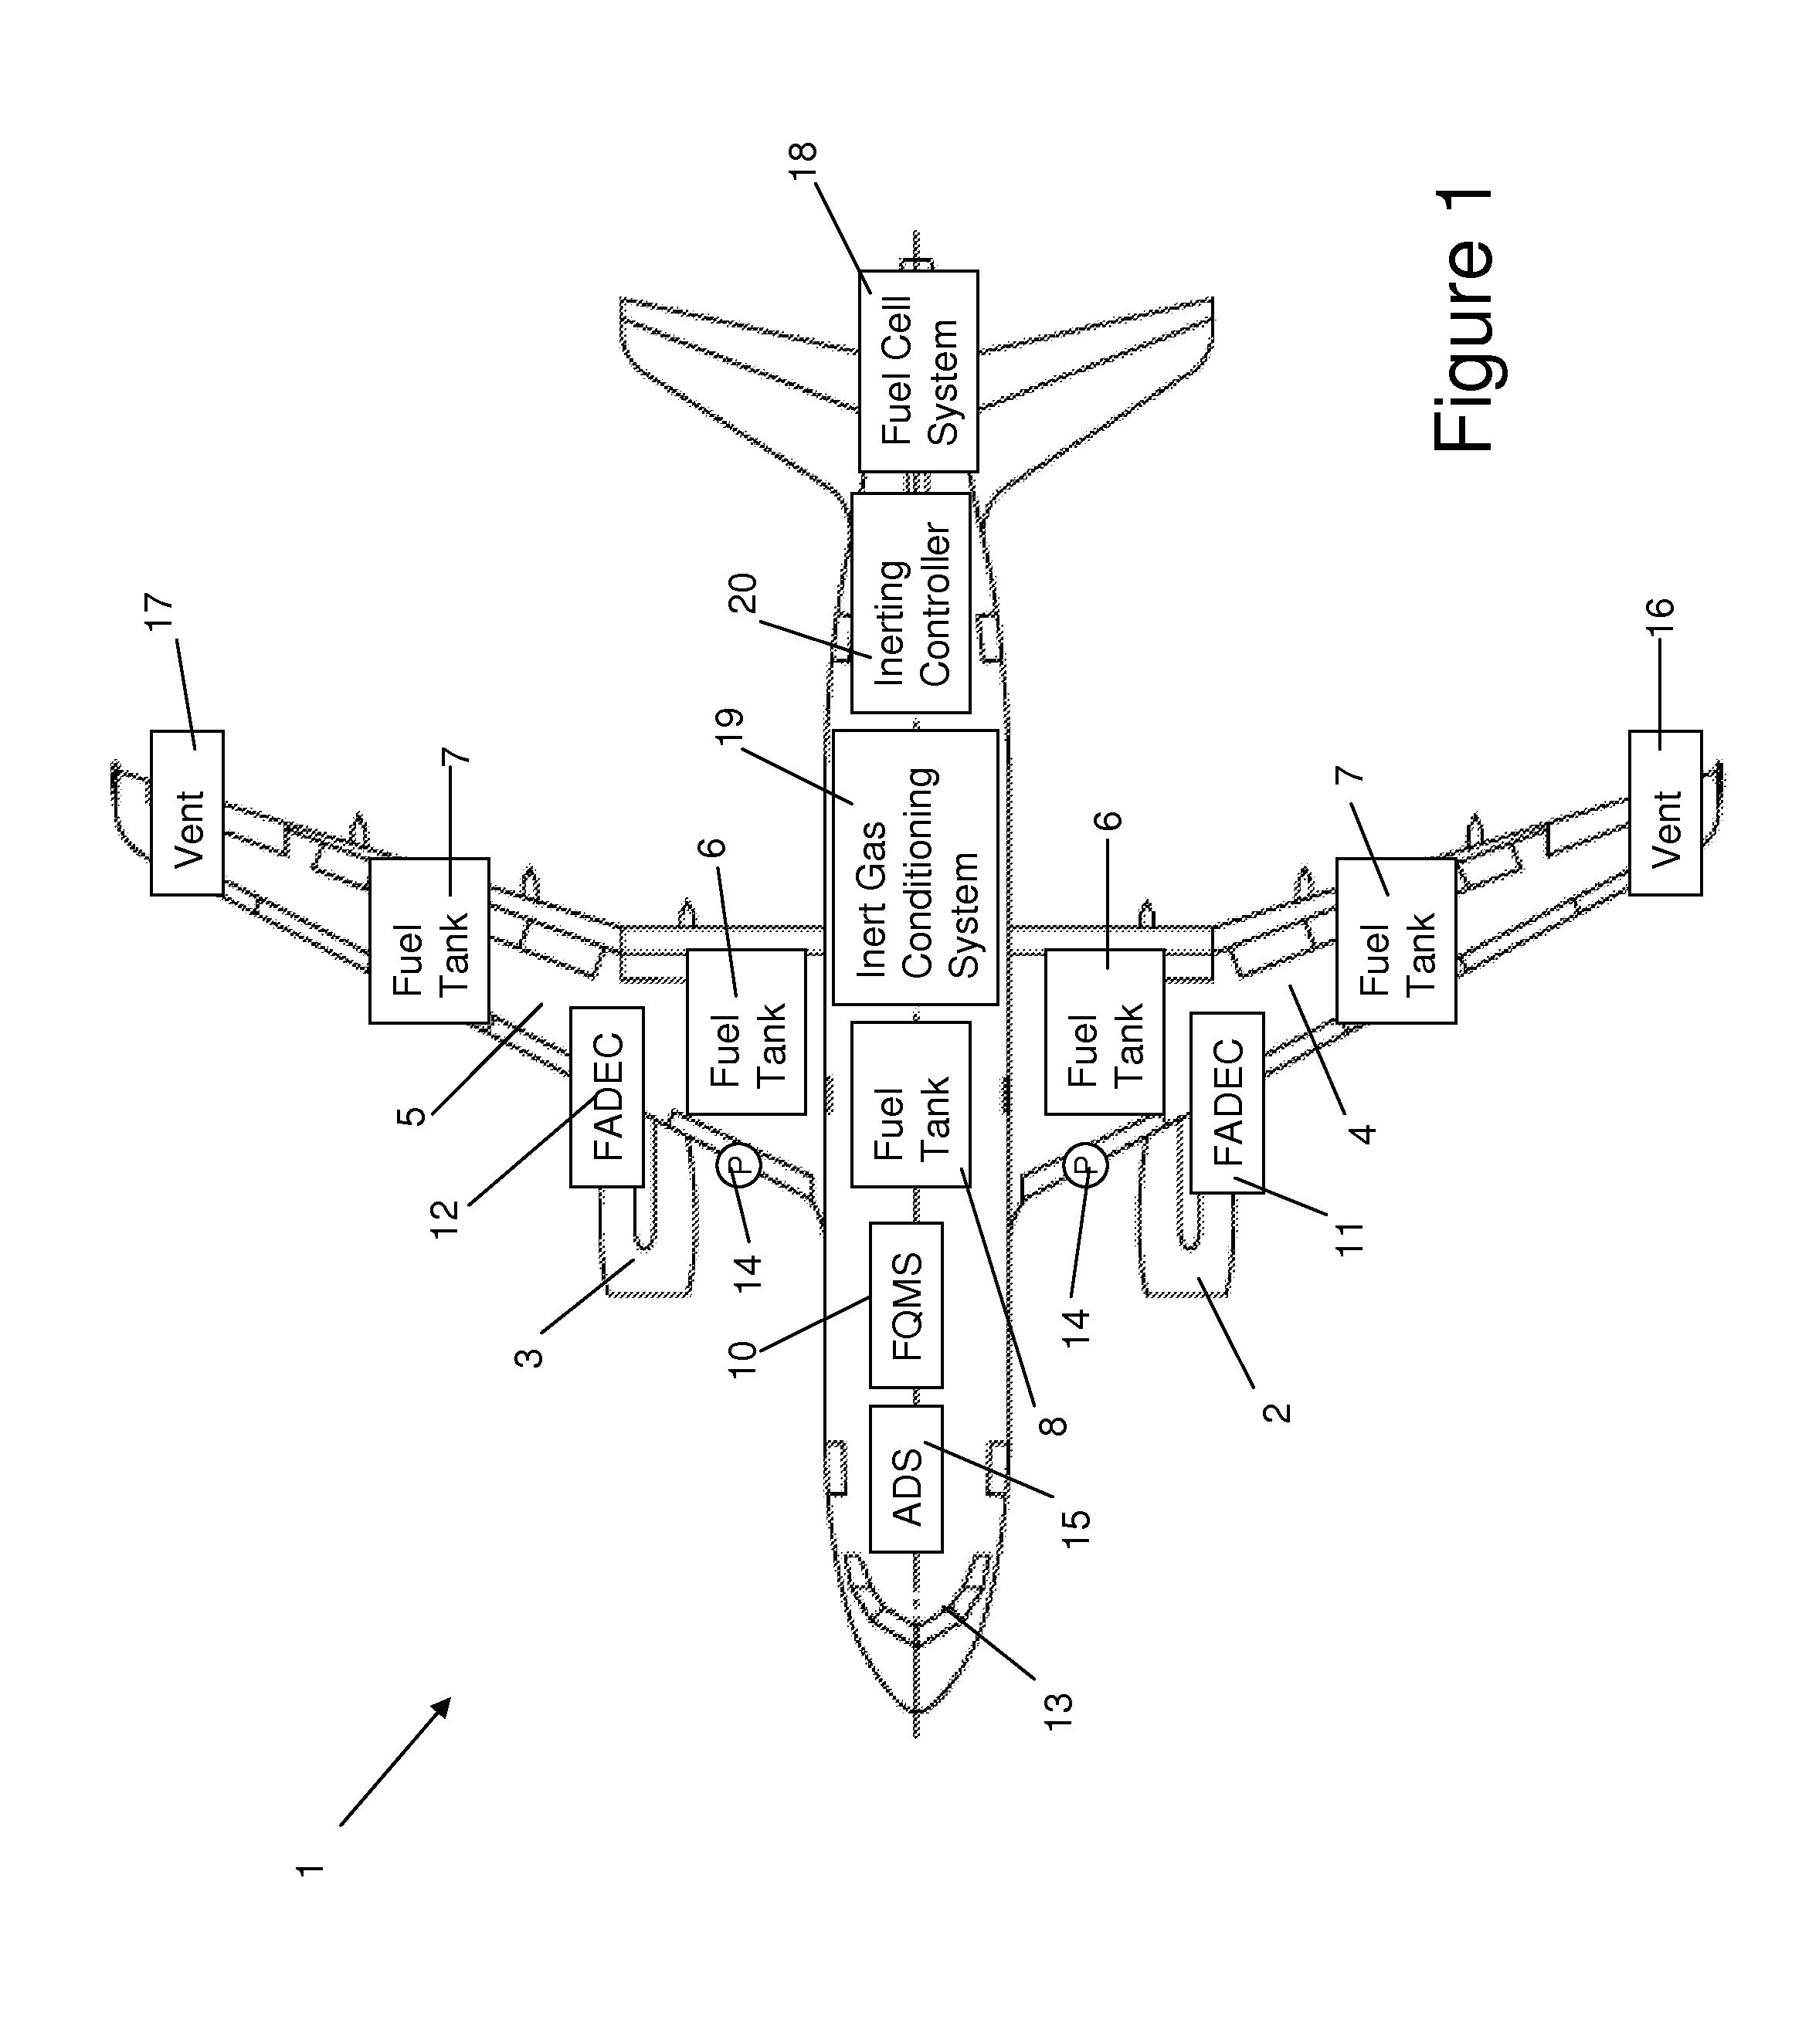 Aircraft inerting system